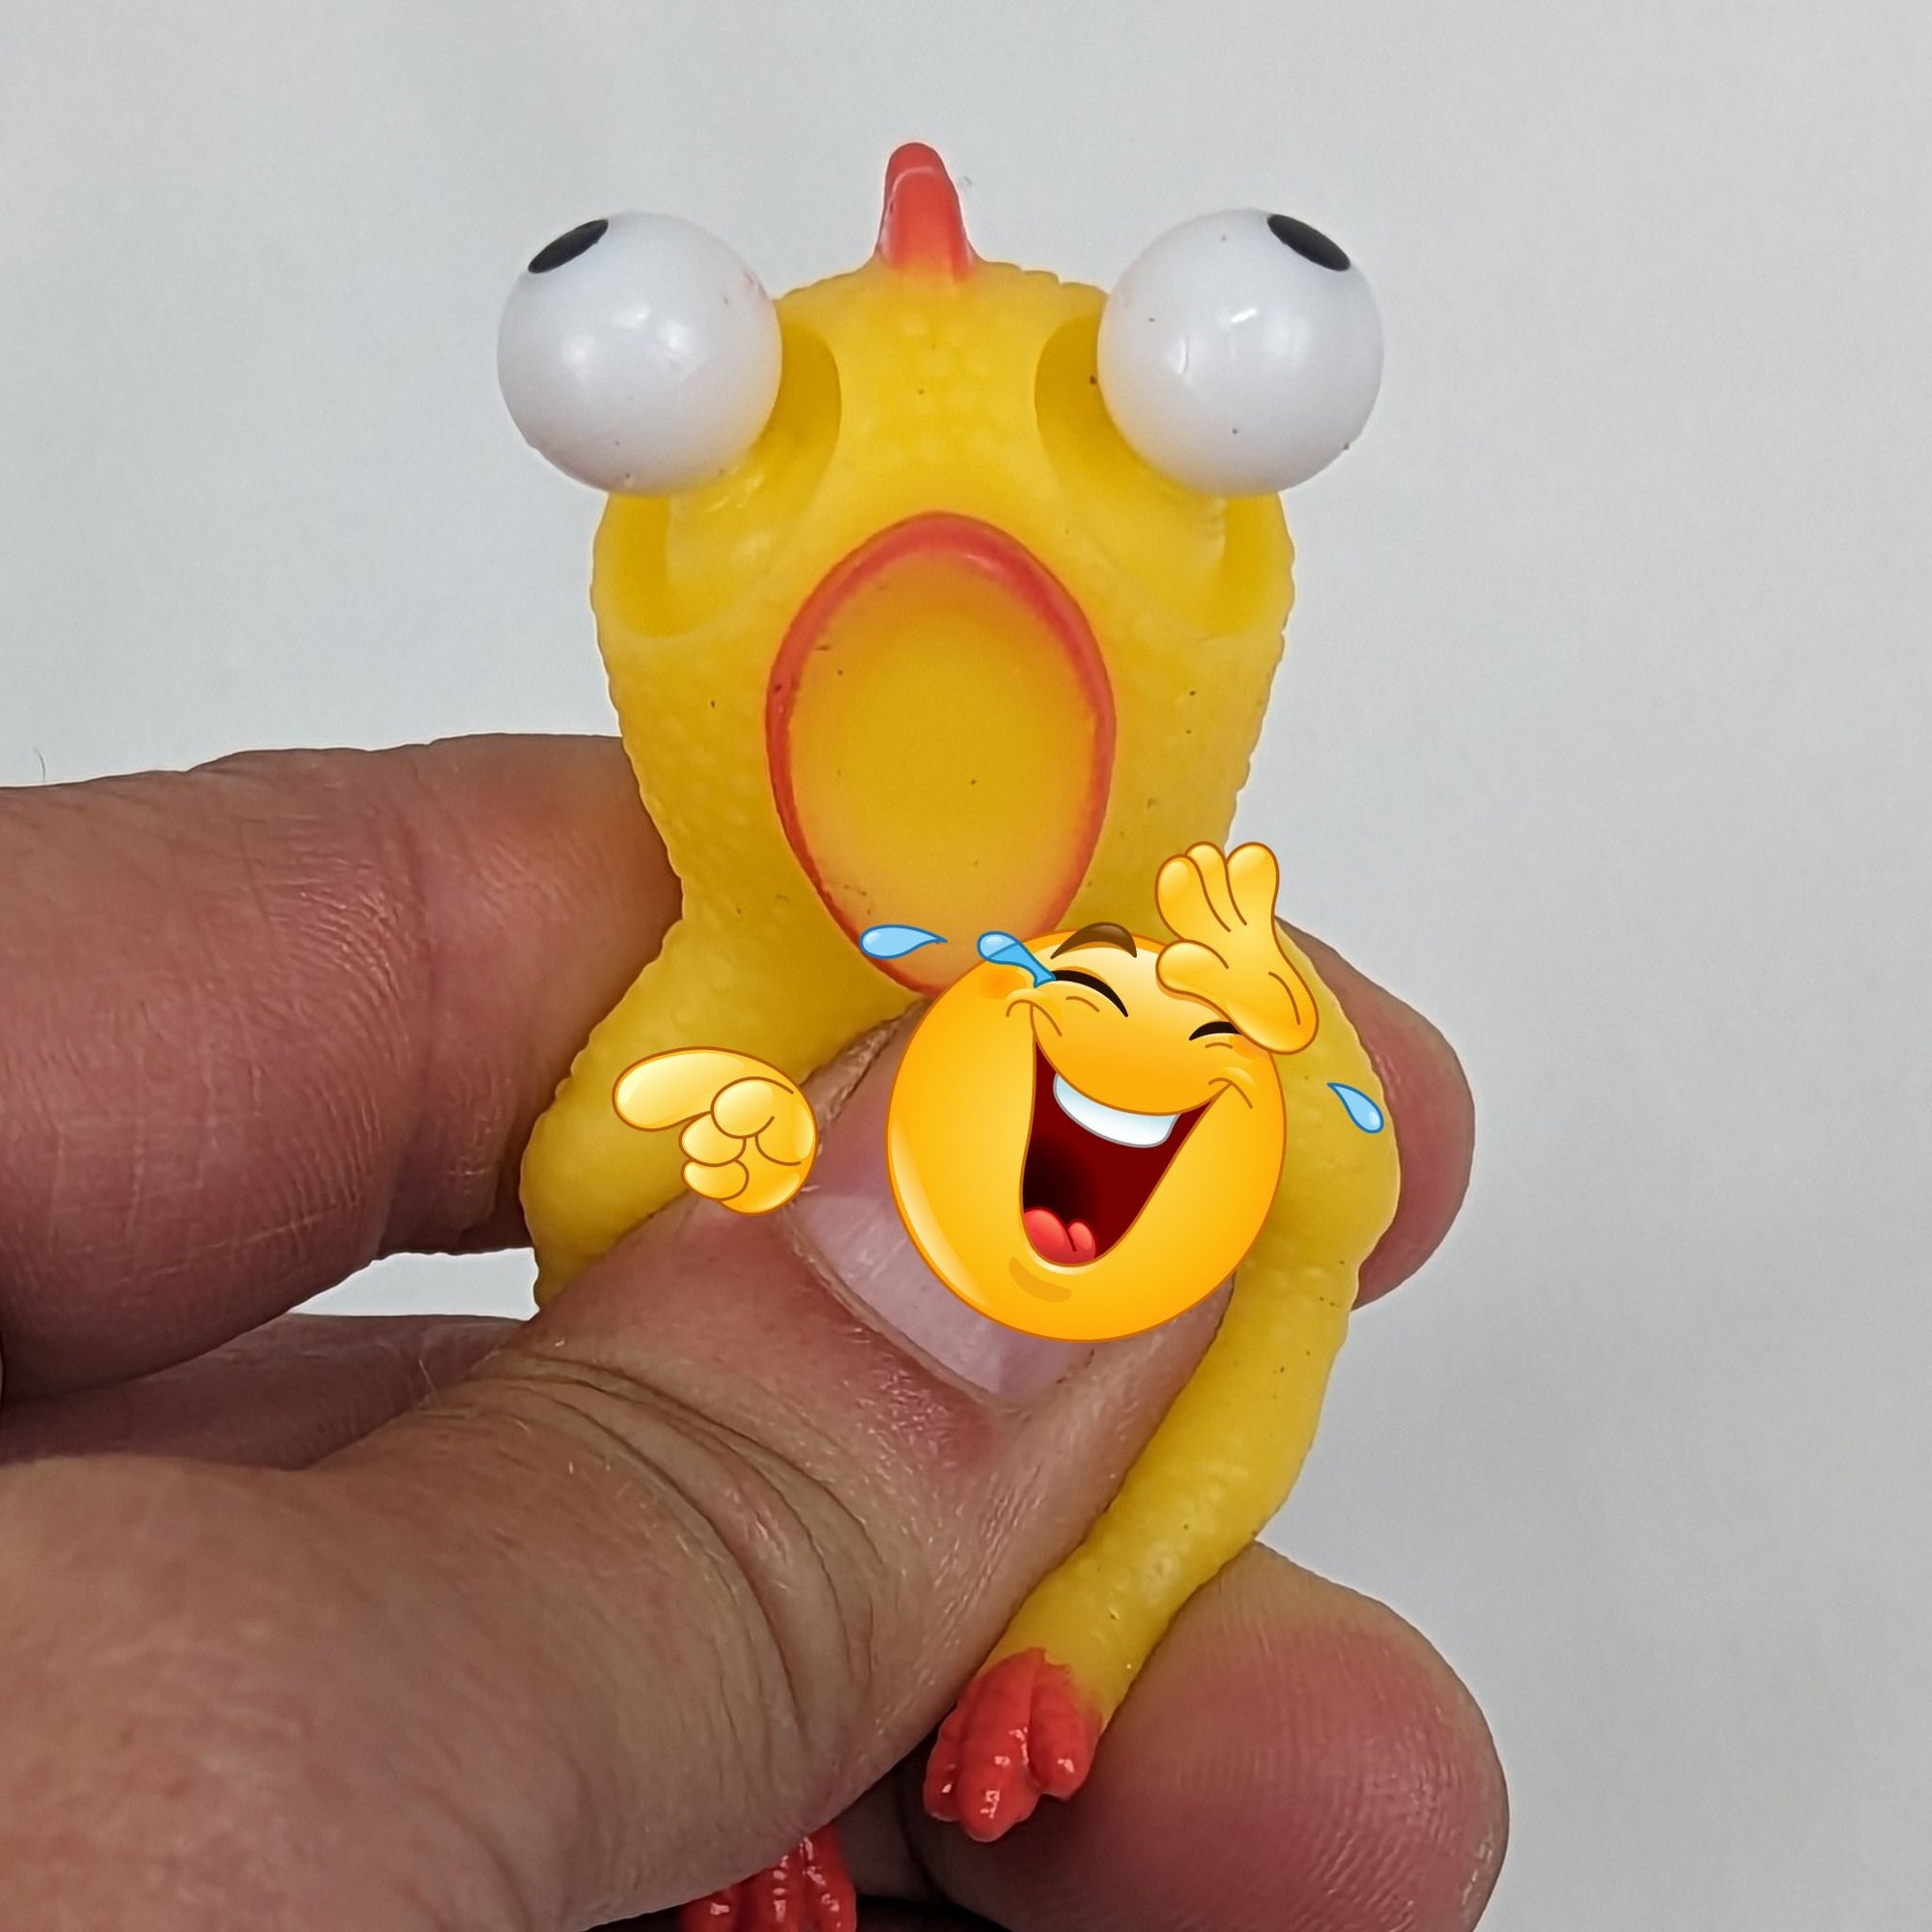 2" Popping Eye Chicken Toy - Cluck It All Farms